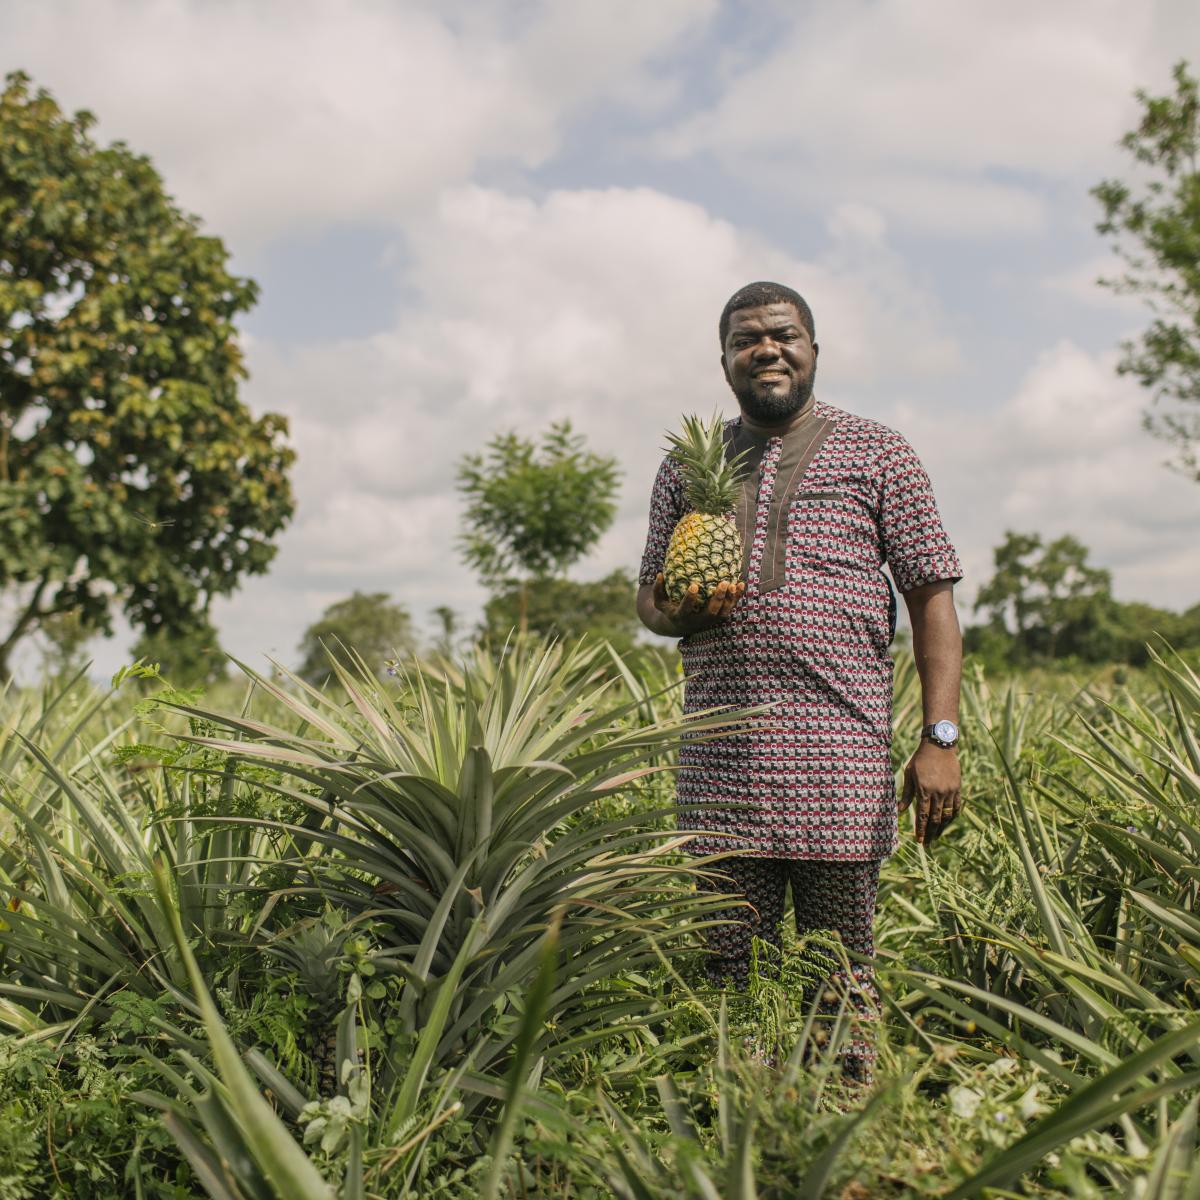 Farmer standing in a field holding a pineapple.